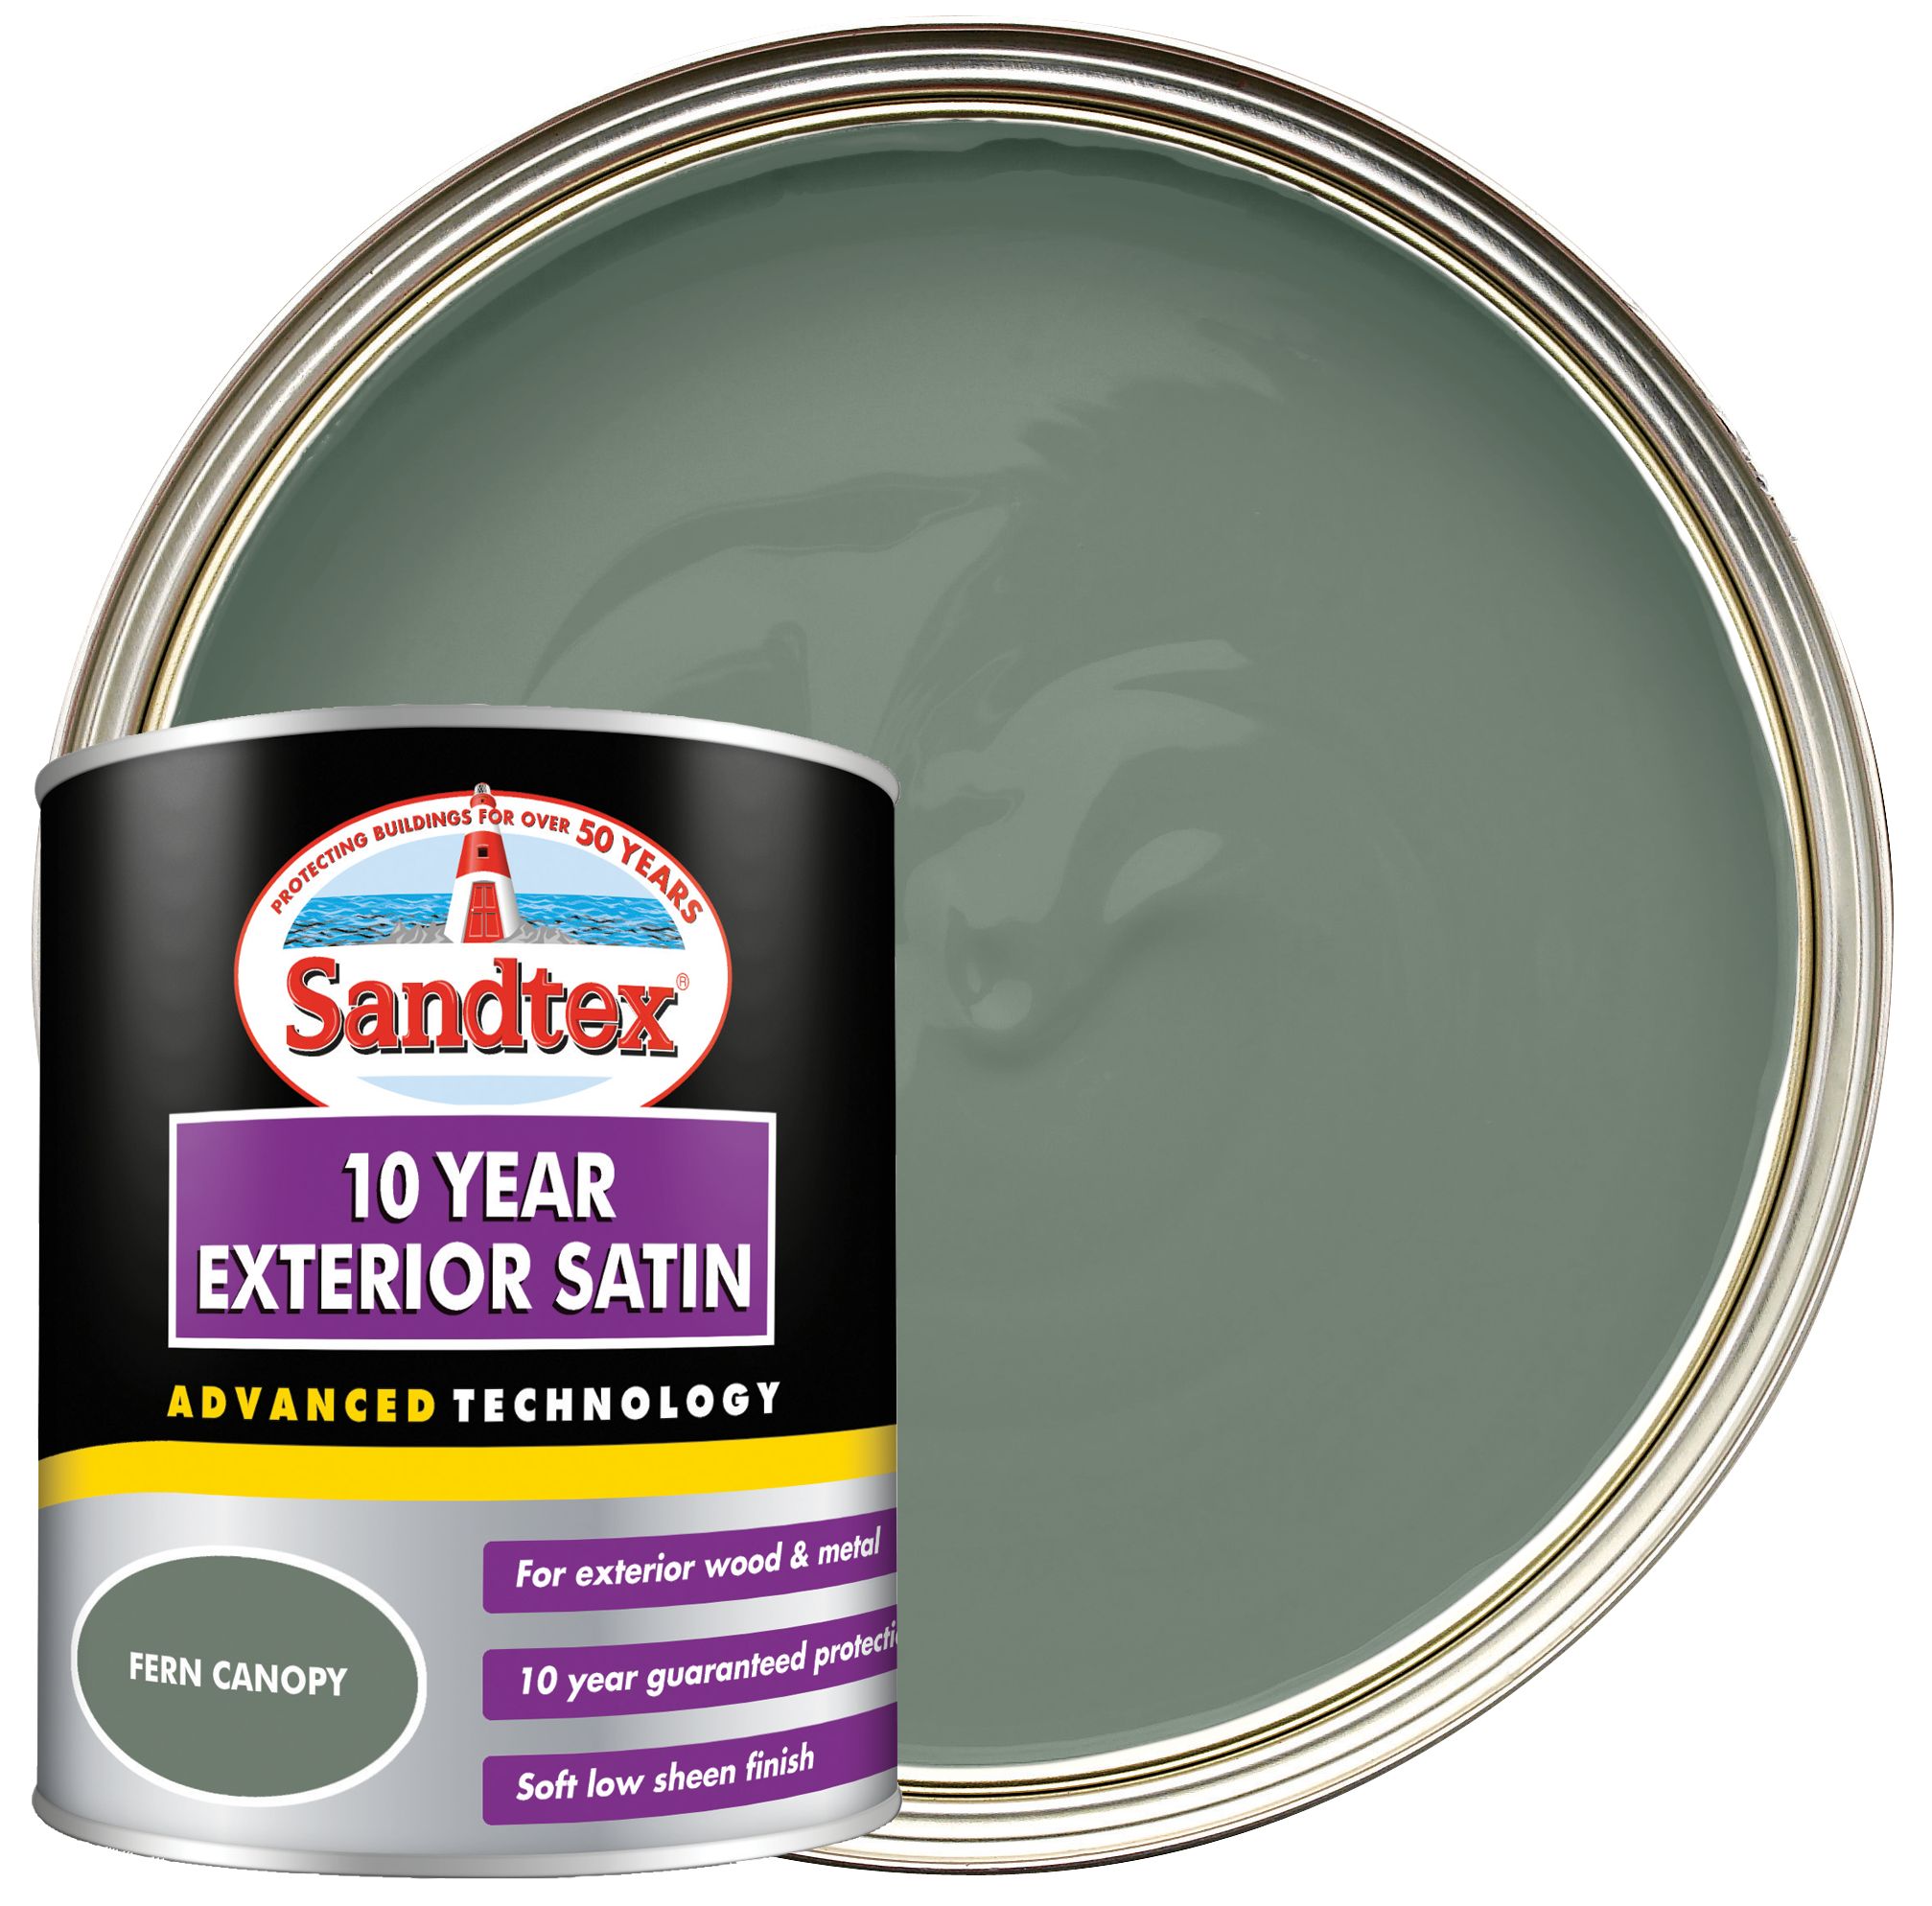 Image of Sandtex 10 Year Exterior Satin Paint - Fern Canopy - 750ml